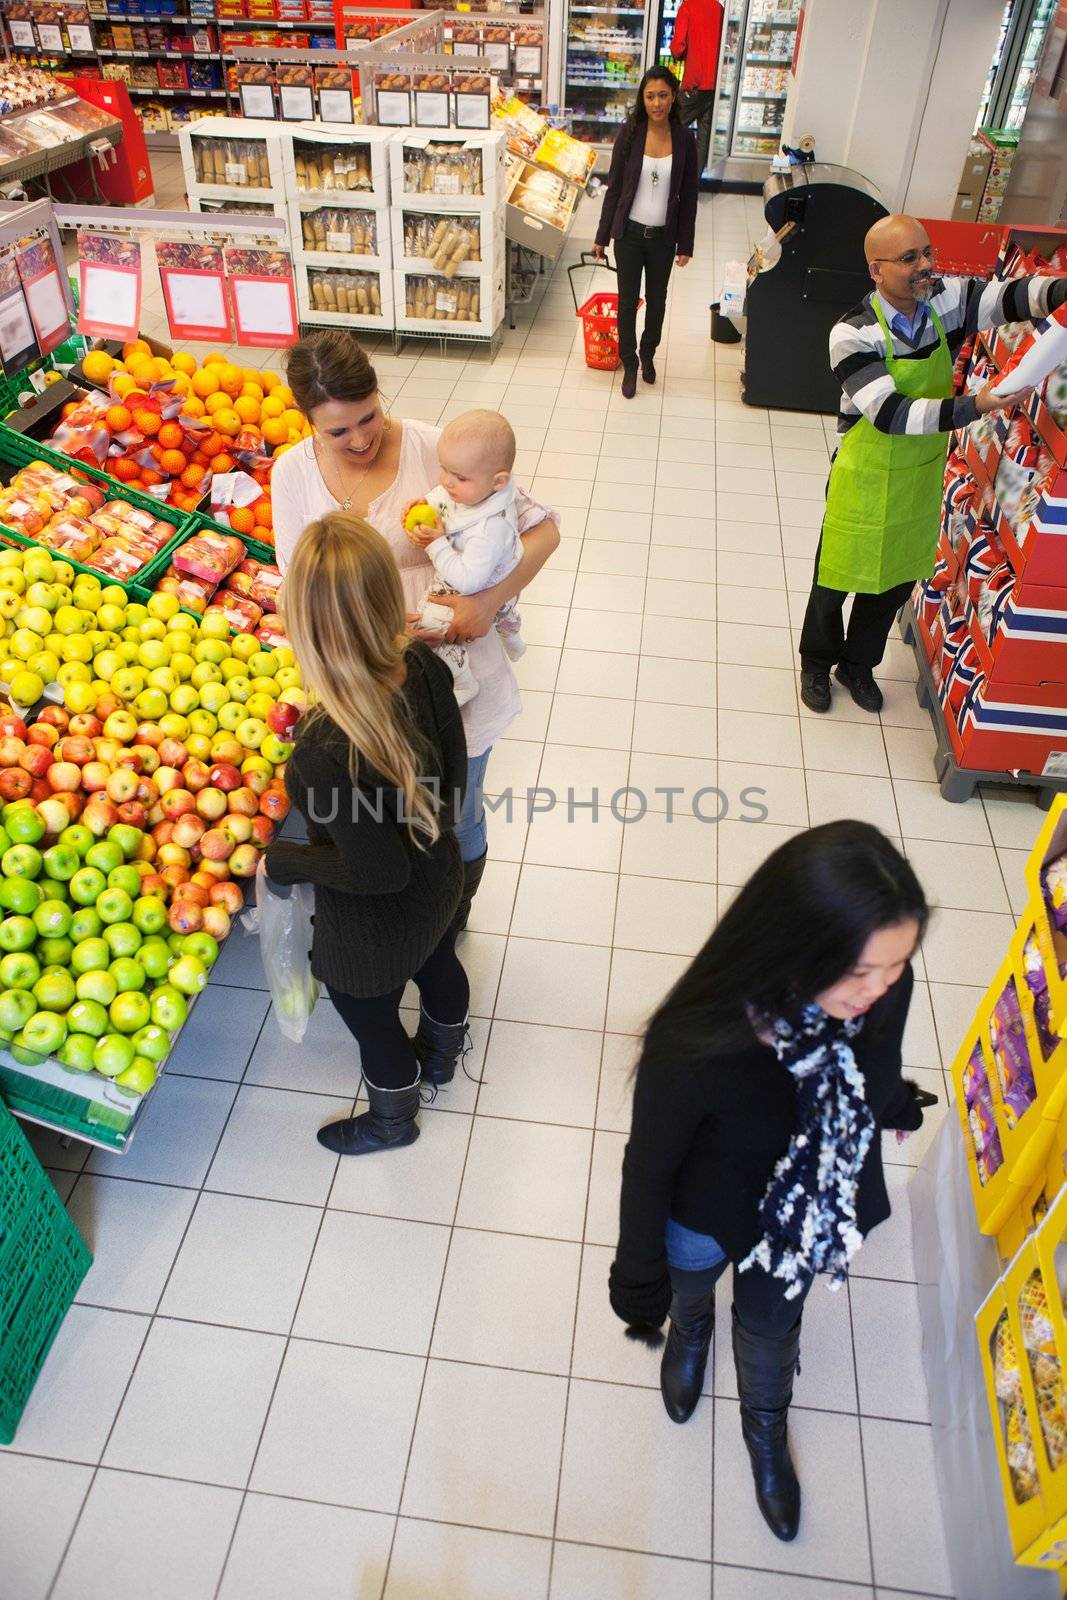 Busy Supermarket by leaf